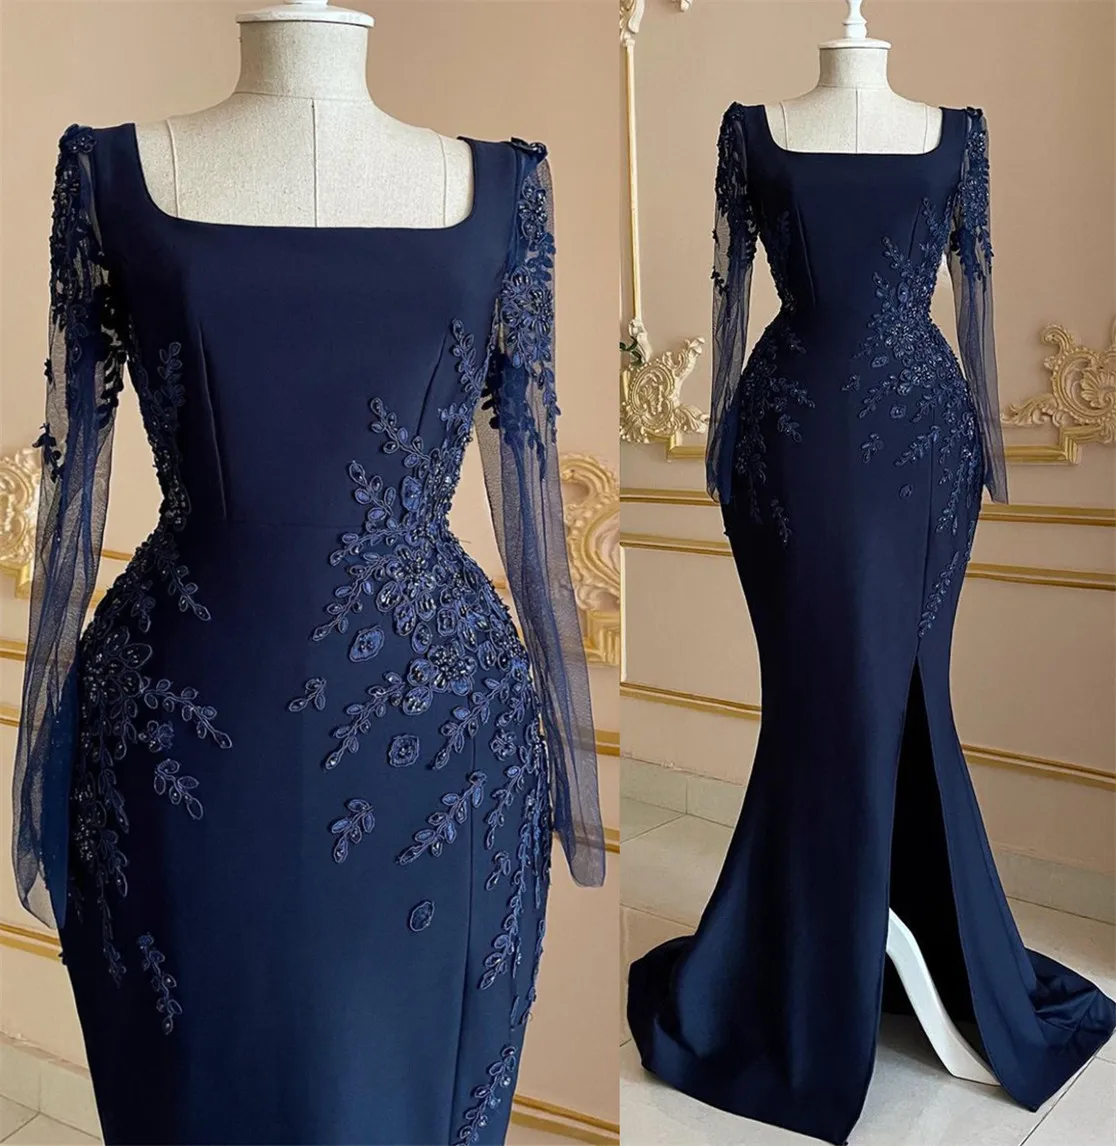 2022 Plus Size Arabic Aso Ebi Navy Blue Mermaid Prom Dresses Lace Beaded Satin Evening Formal Party Second Reception Bridesmaid Gowns Dress ZJ411